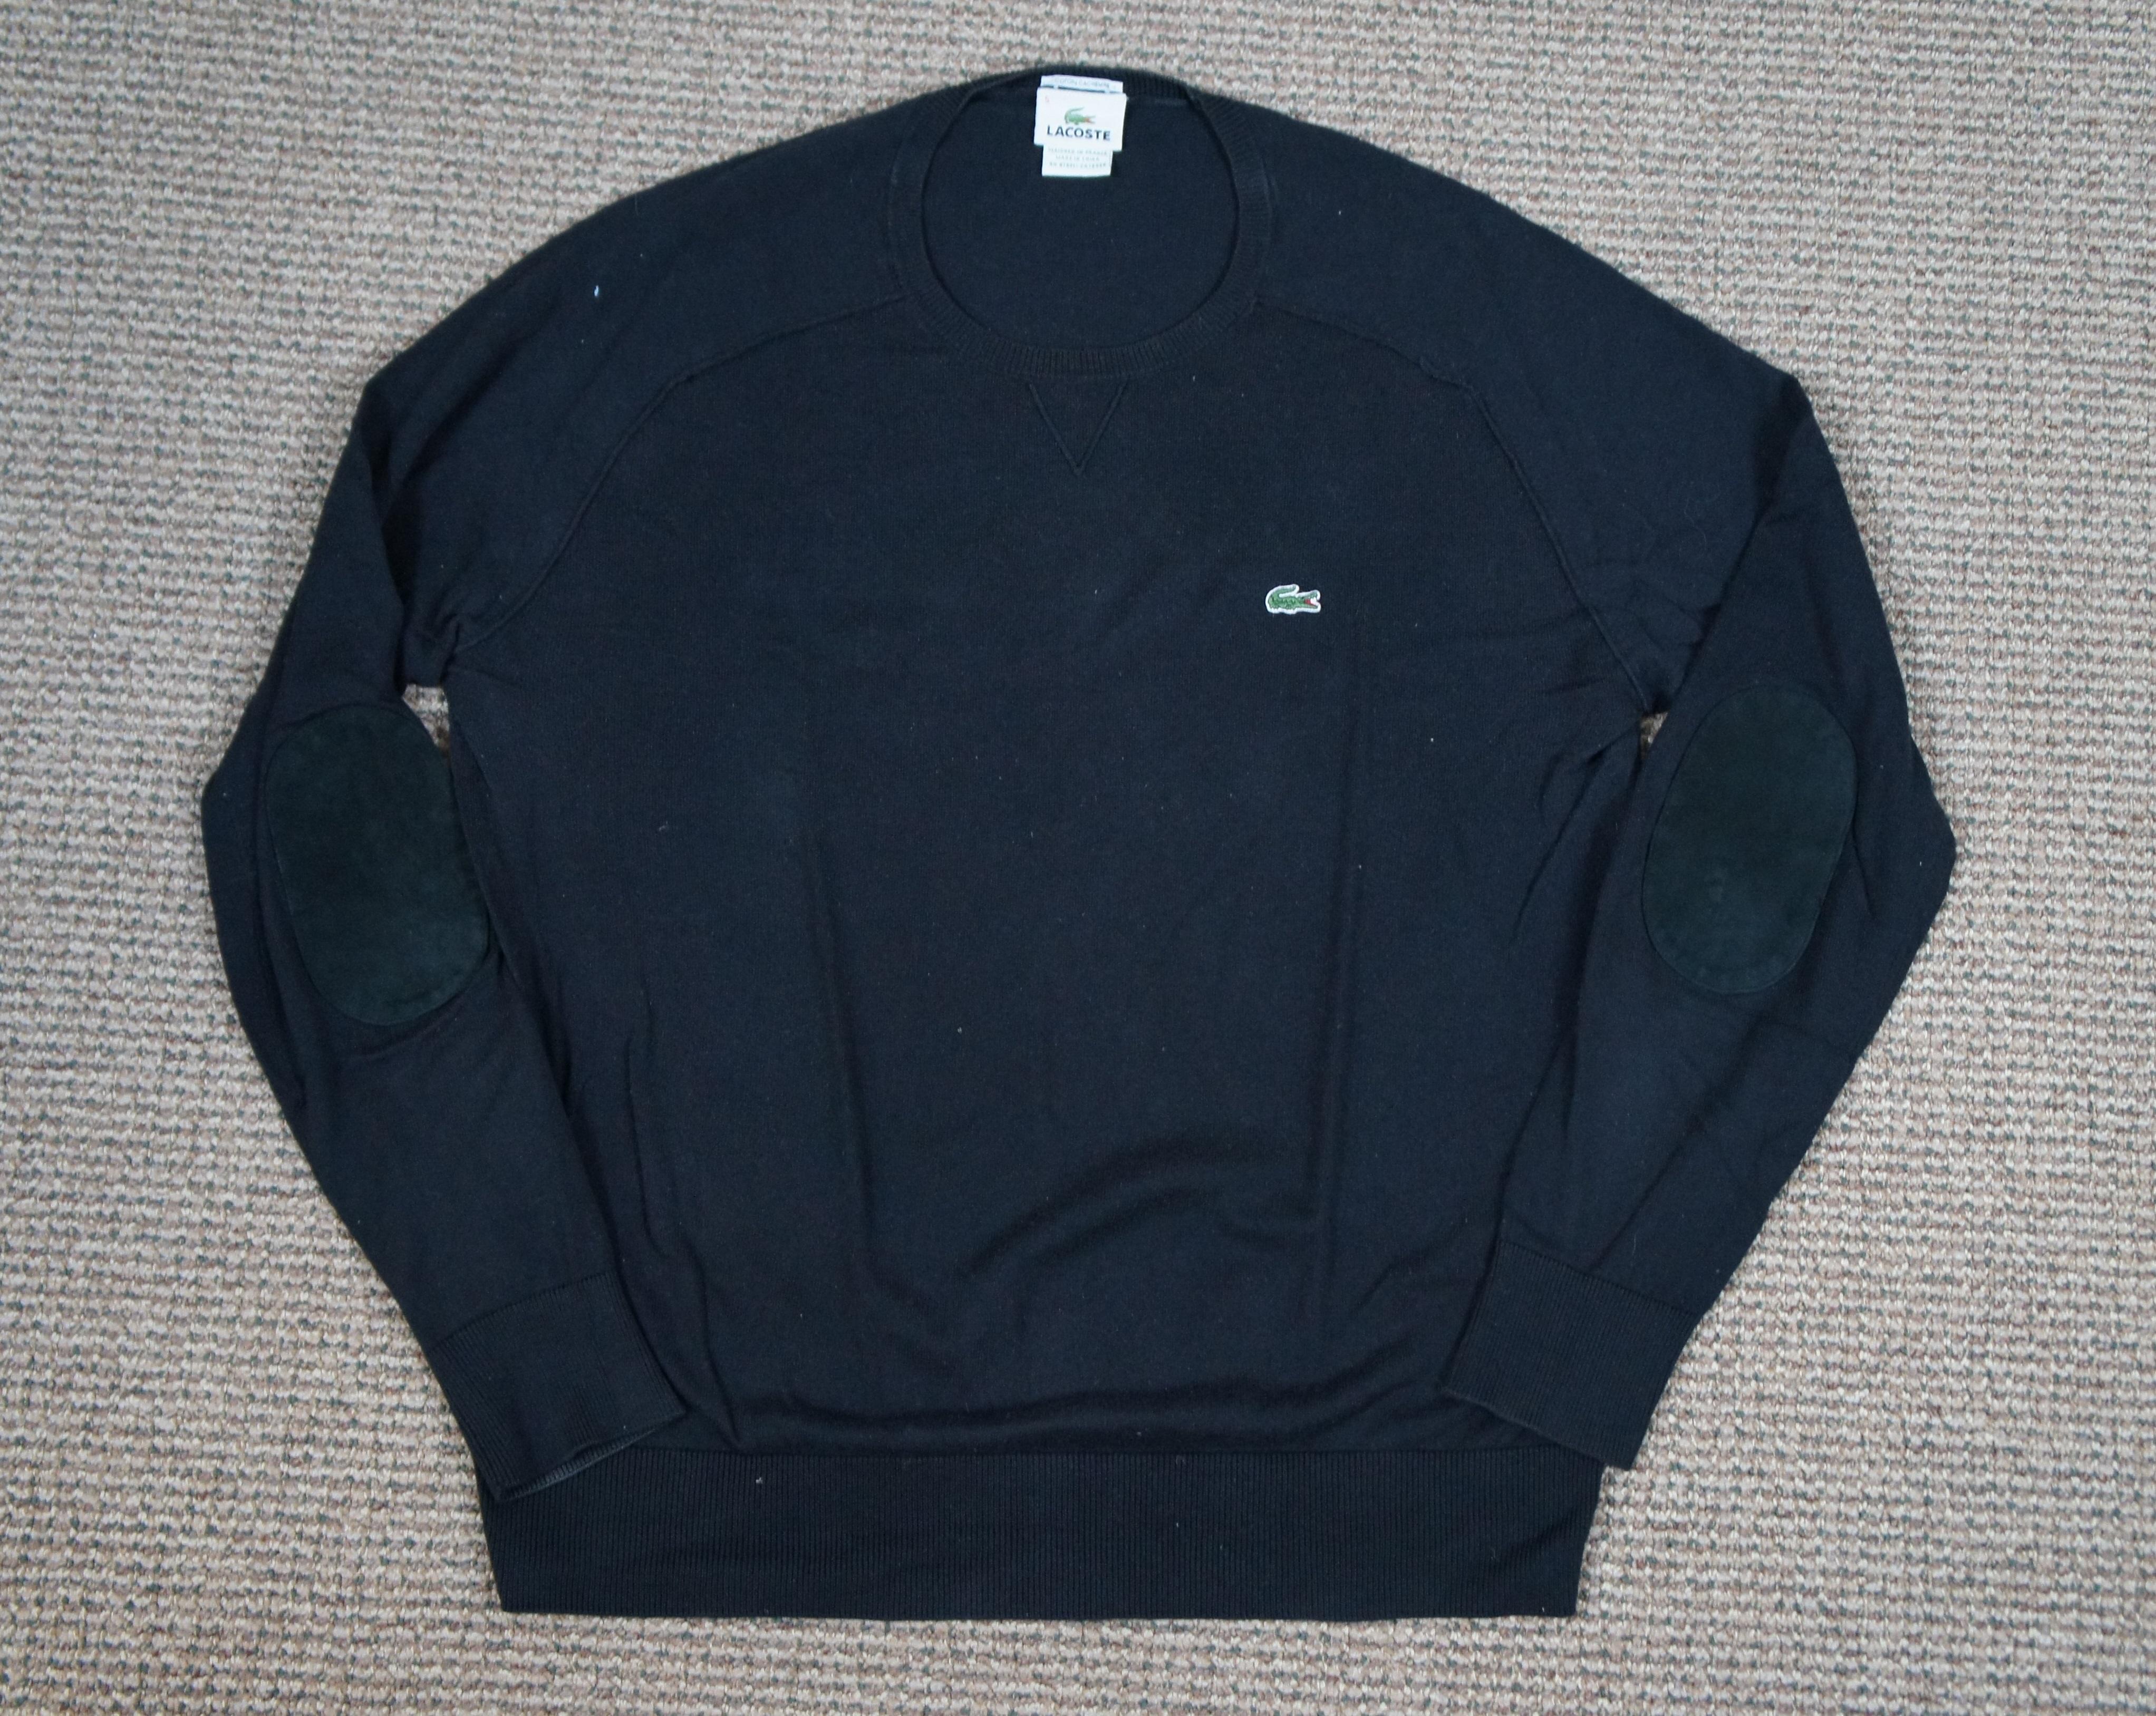 2 Lacoste Sports D'Hiver Pull Over Sweaters Black Blue Mens Elbow Patch 5 L In Good Condition For Sale In Dayton, OH